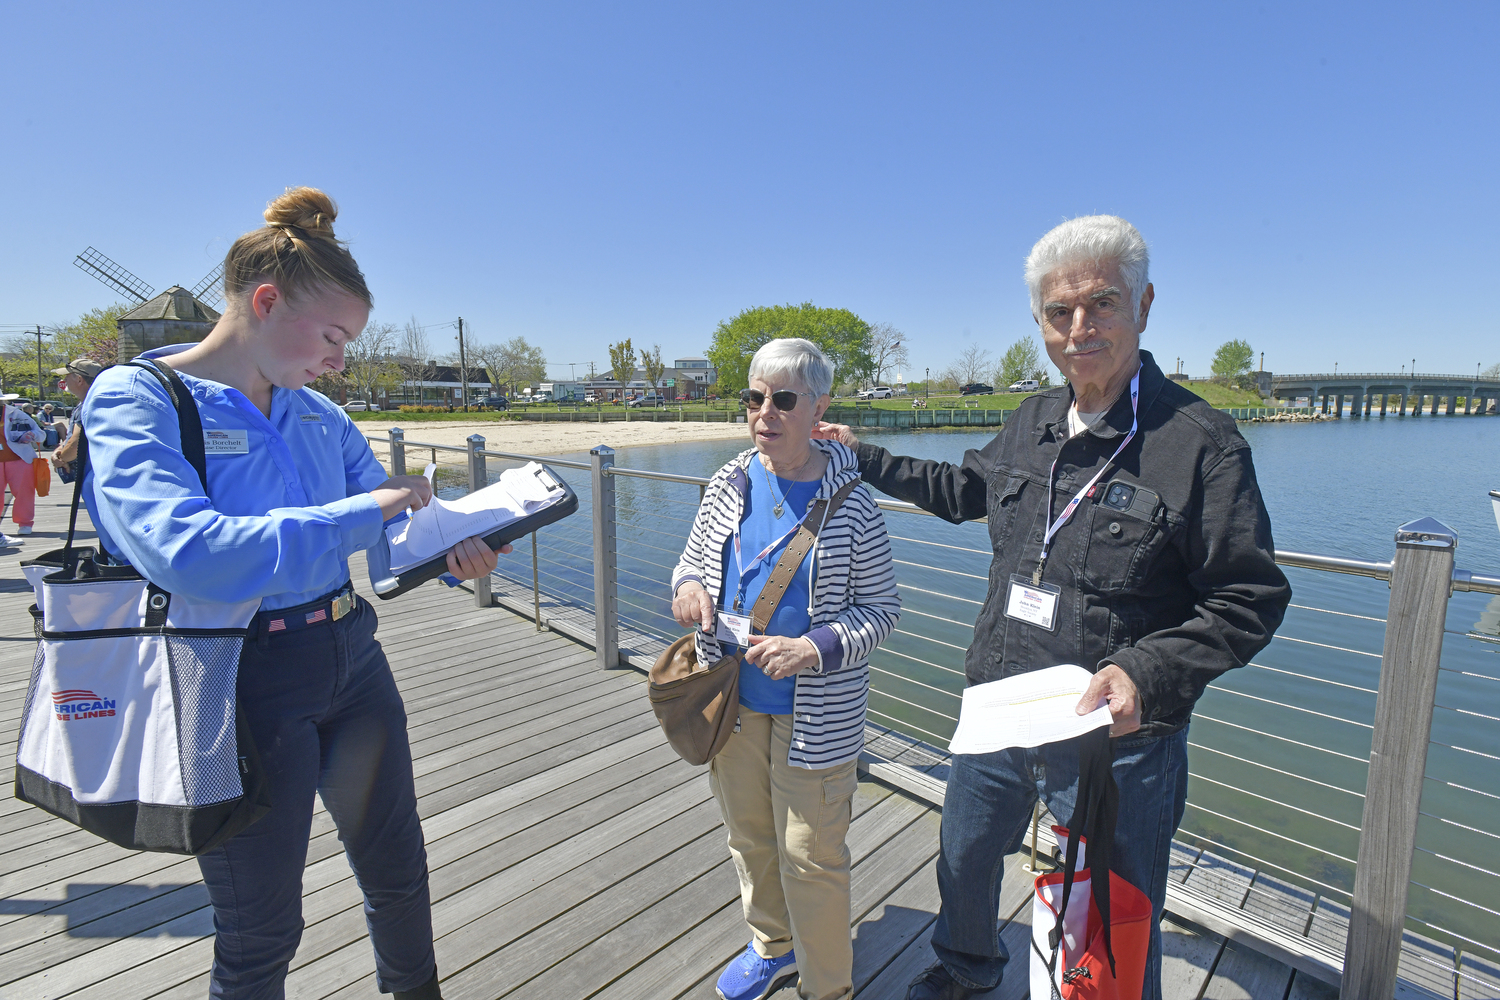 American Cruise Line passengers Beth and John Klein check in with cruise and excursion director Karis Borchelt as they wait for their launch back to their ship at the dock in Sag Harbor on Tuesday.